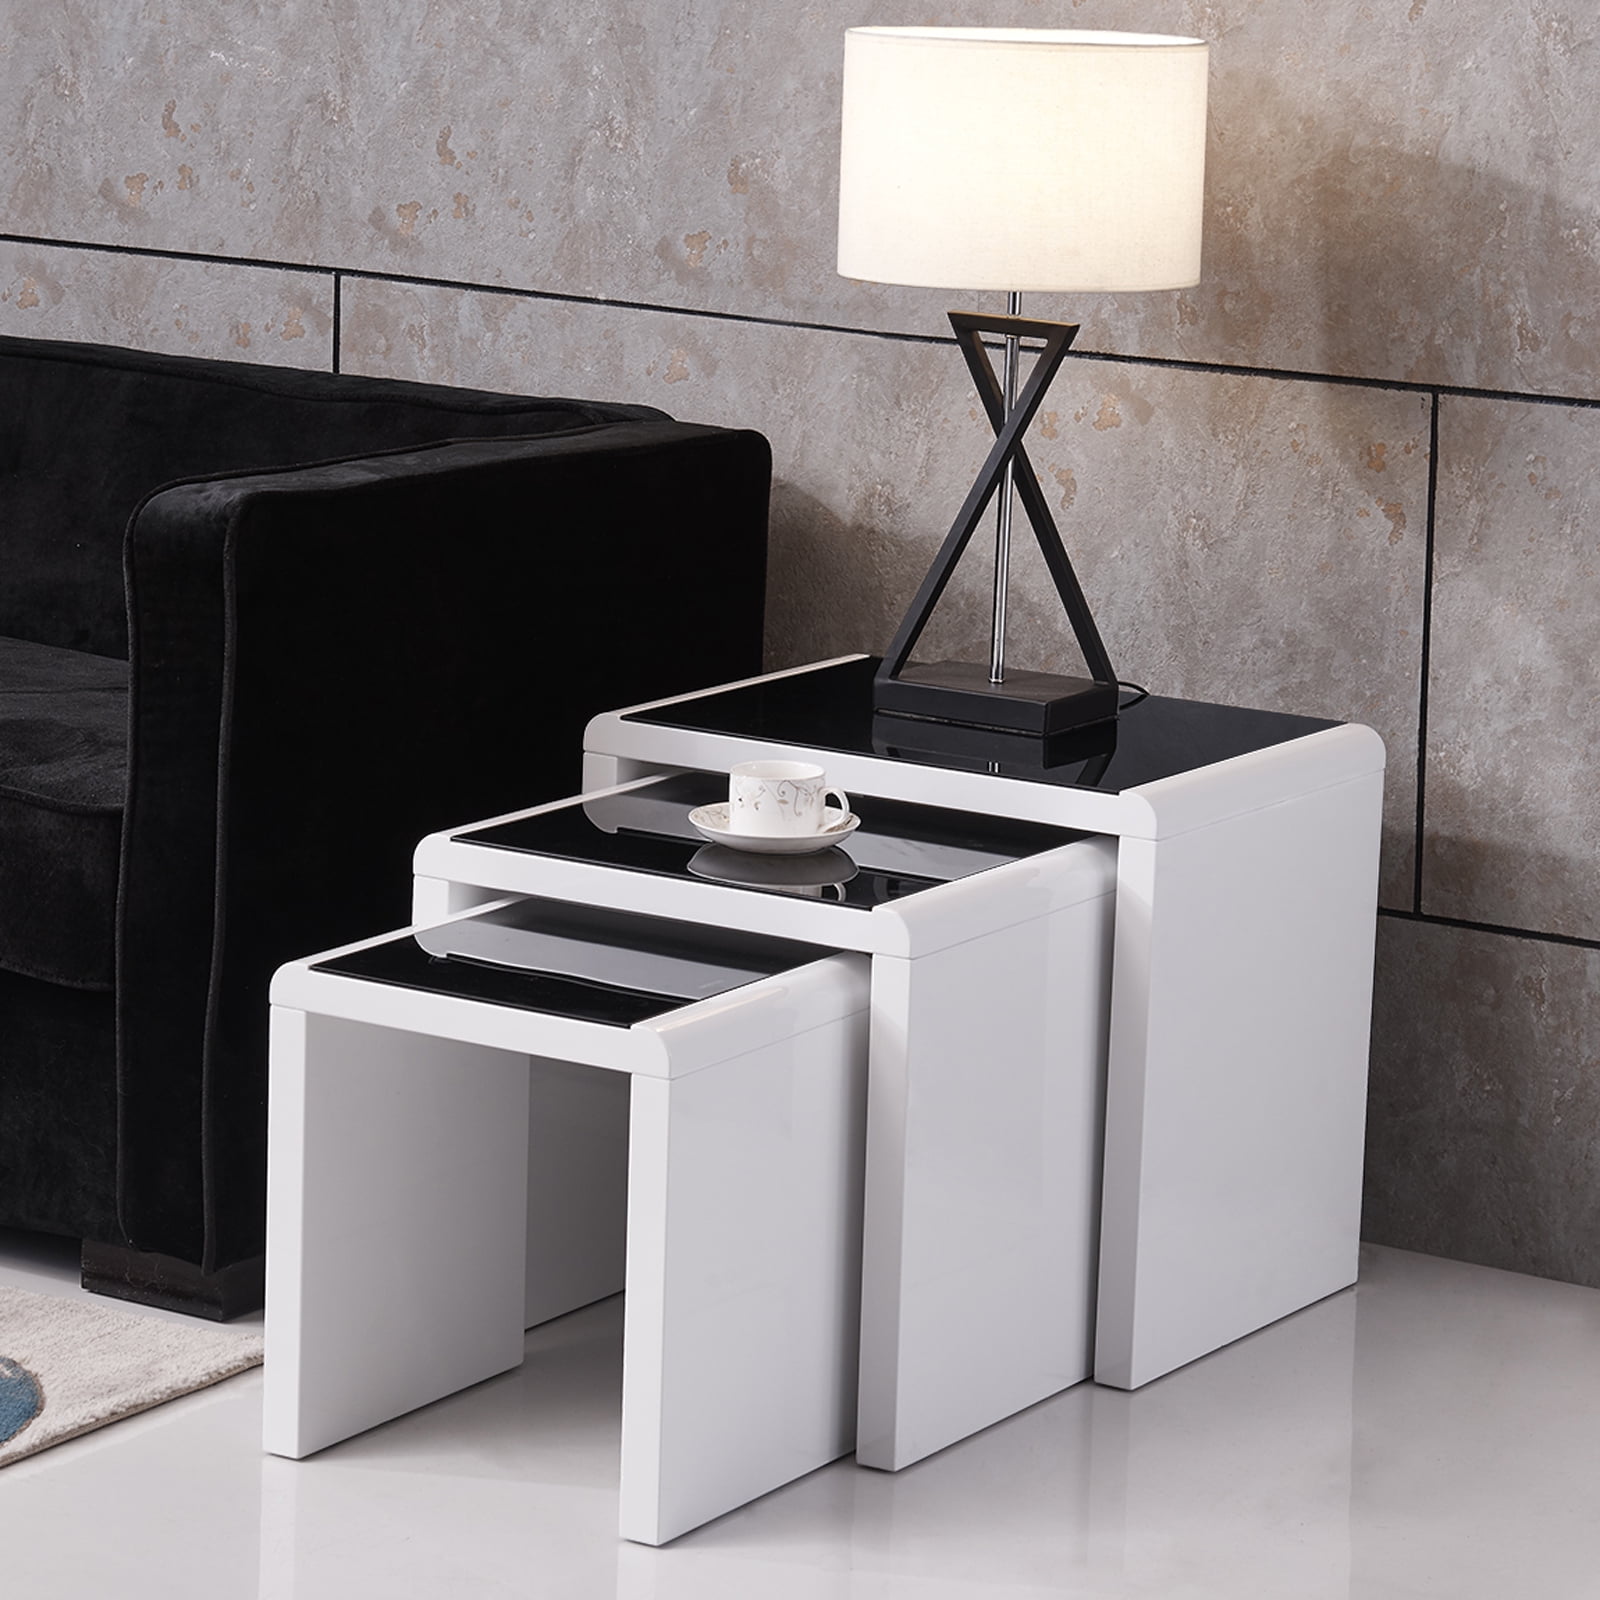 Modern Nest of 3 Coffee Table Side End Table High Gloss White Black